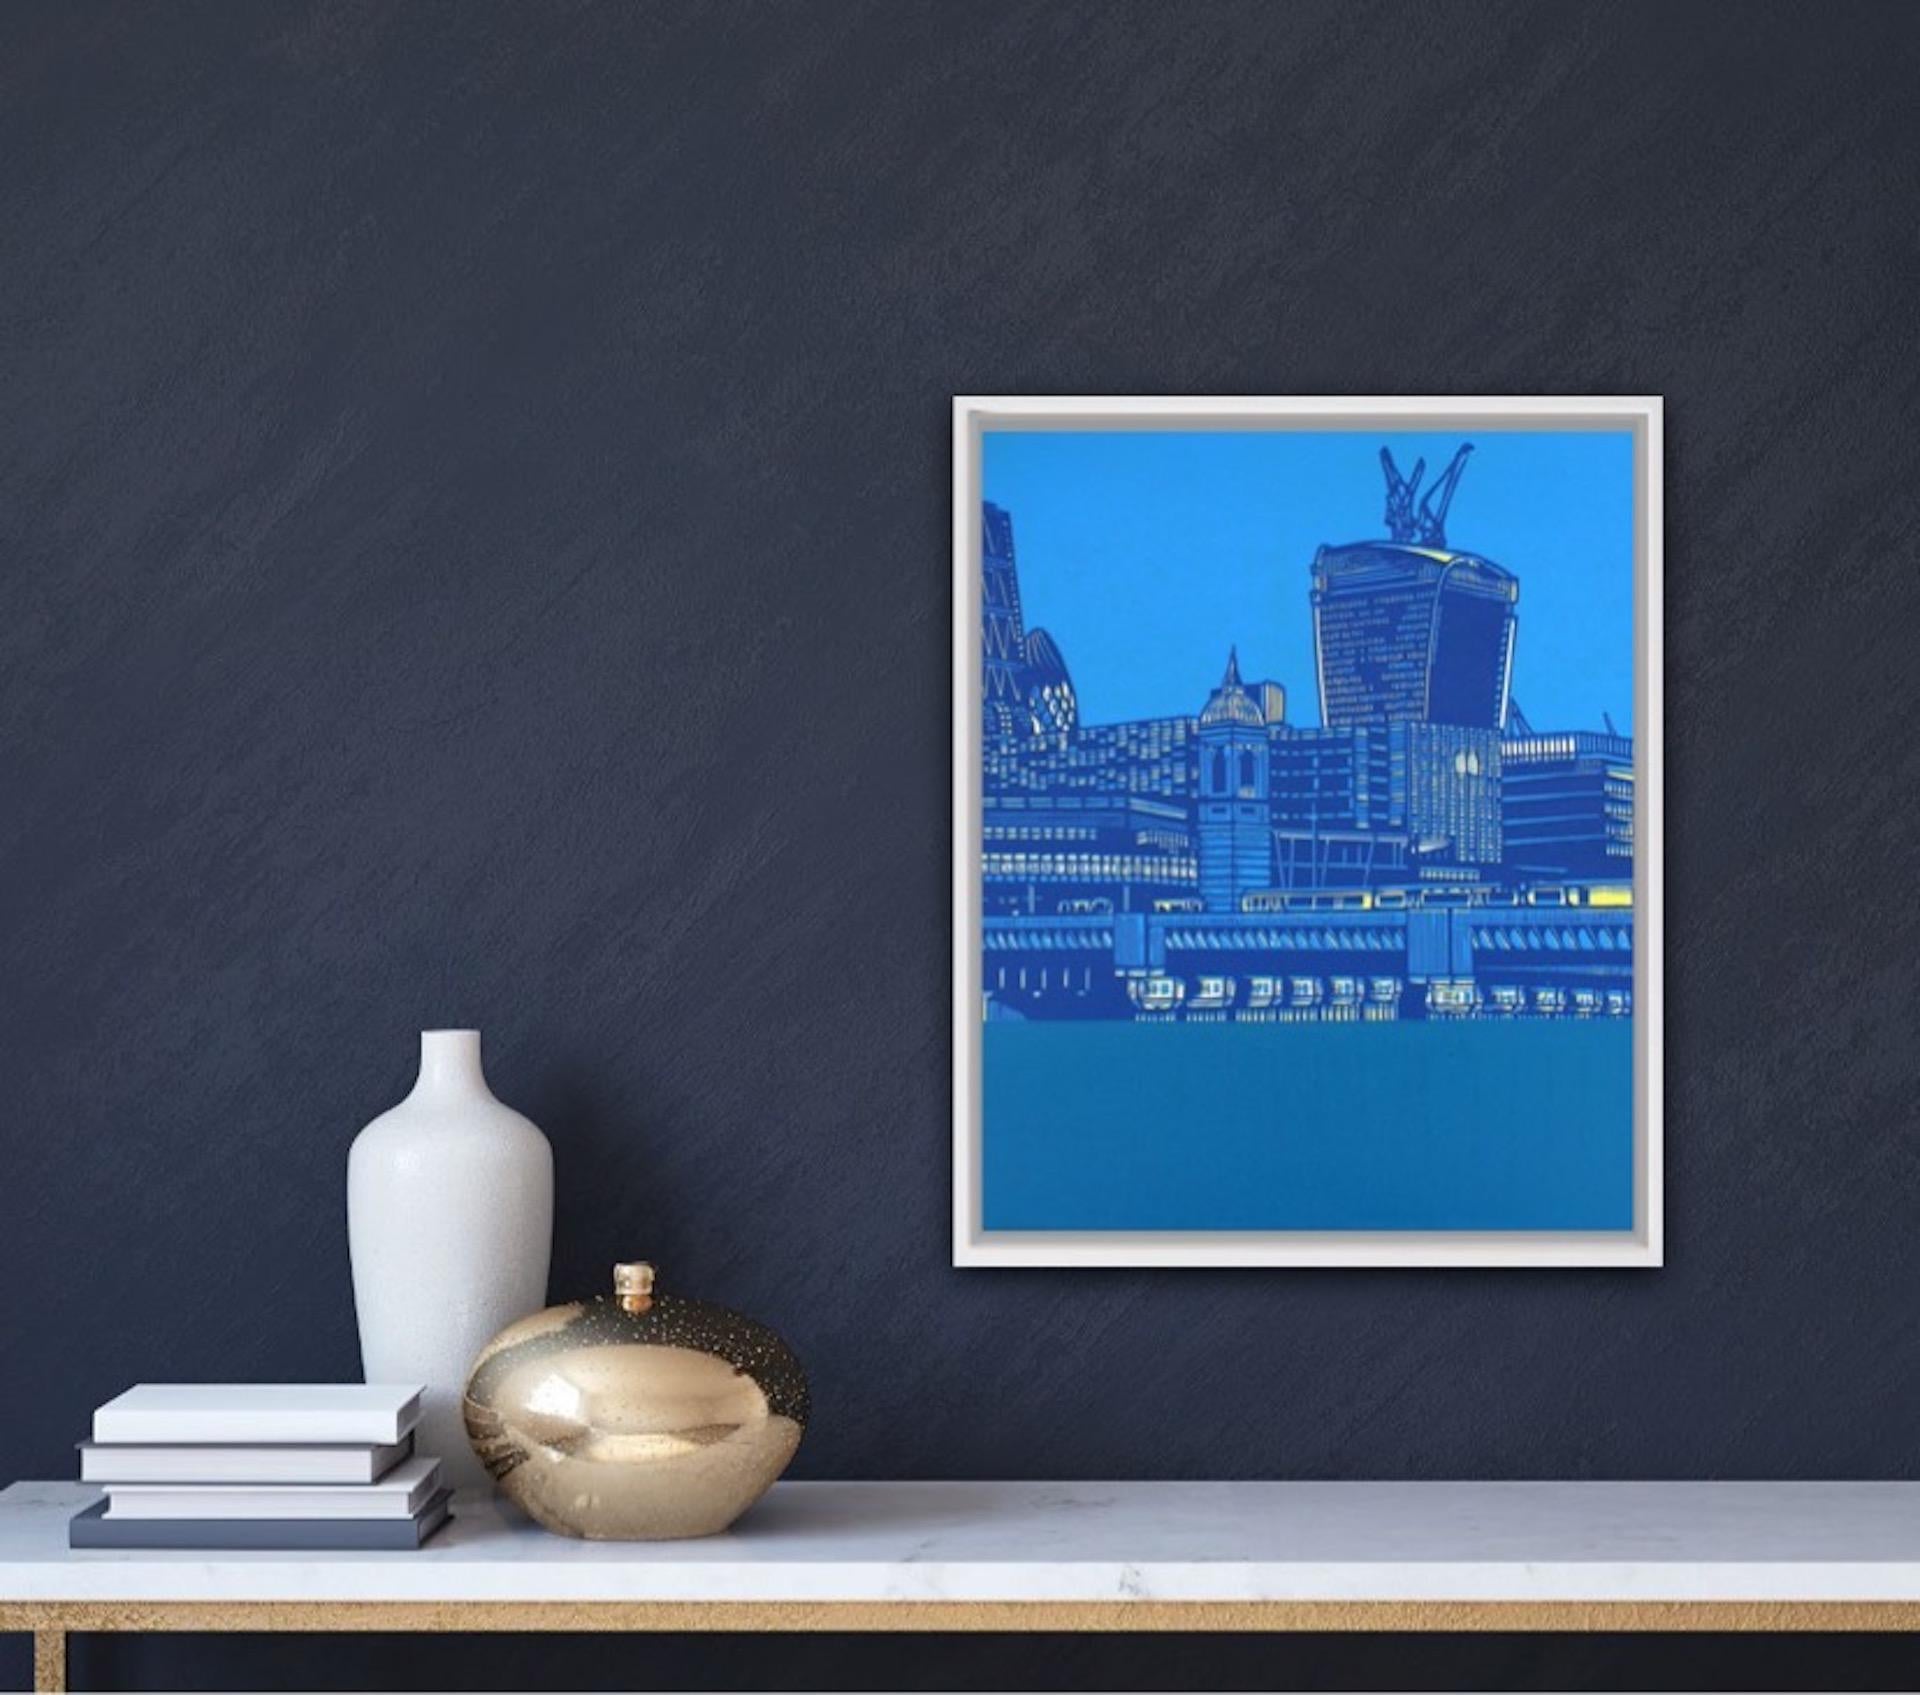 Jennifer Jokhoo
Cannon Street Return
Limted Edition Print
Four Different Colours available
Image Size: H 40cm x W 41cm
Signed
Sold Unframed
(Please note that in situ images are purely an indication of how a piece may look).

Cannon Street return is